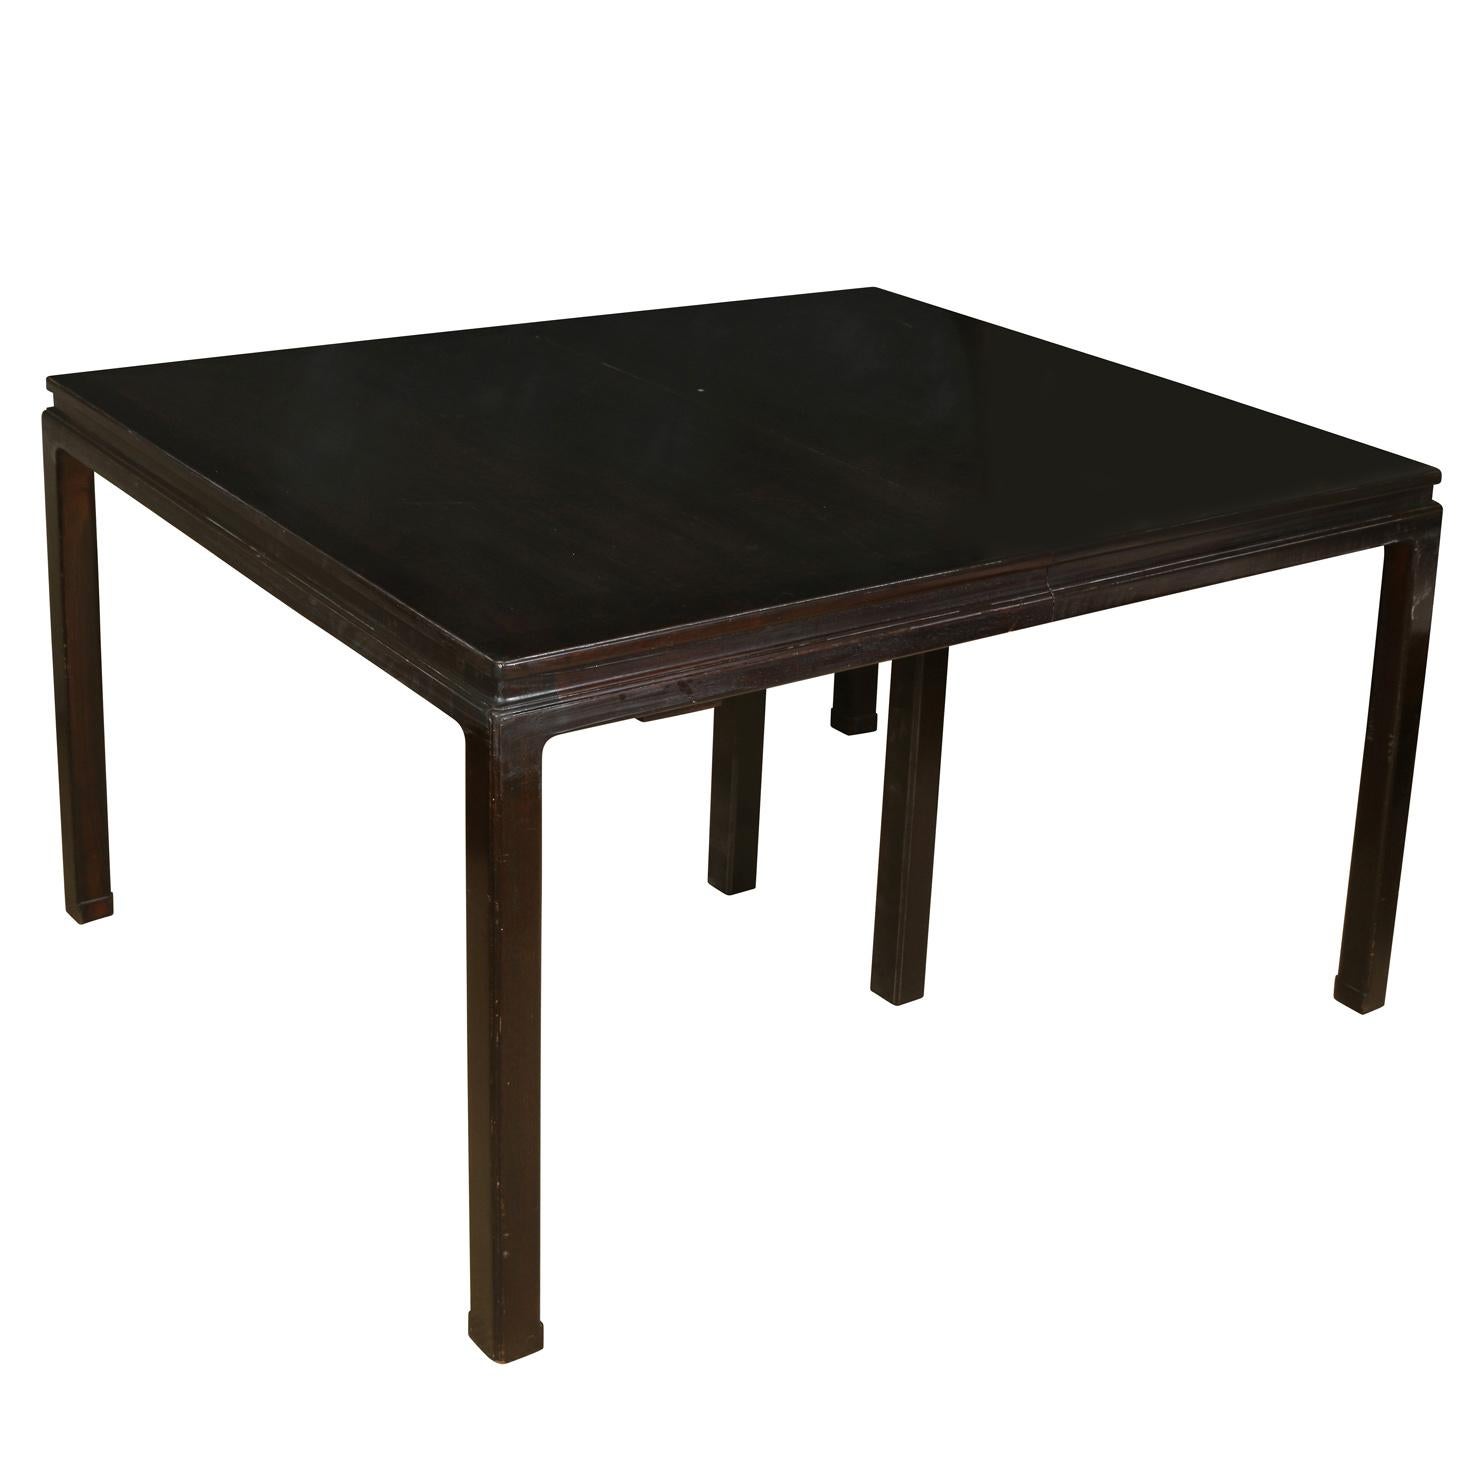 A lacquered dining table in Dunbar style with two leaves. A dark, gloss finished, Mid-Century Modern style table.